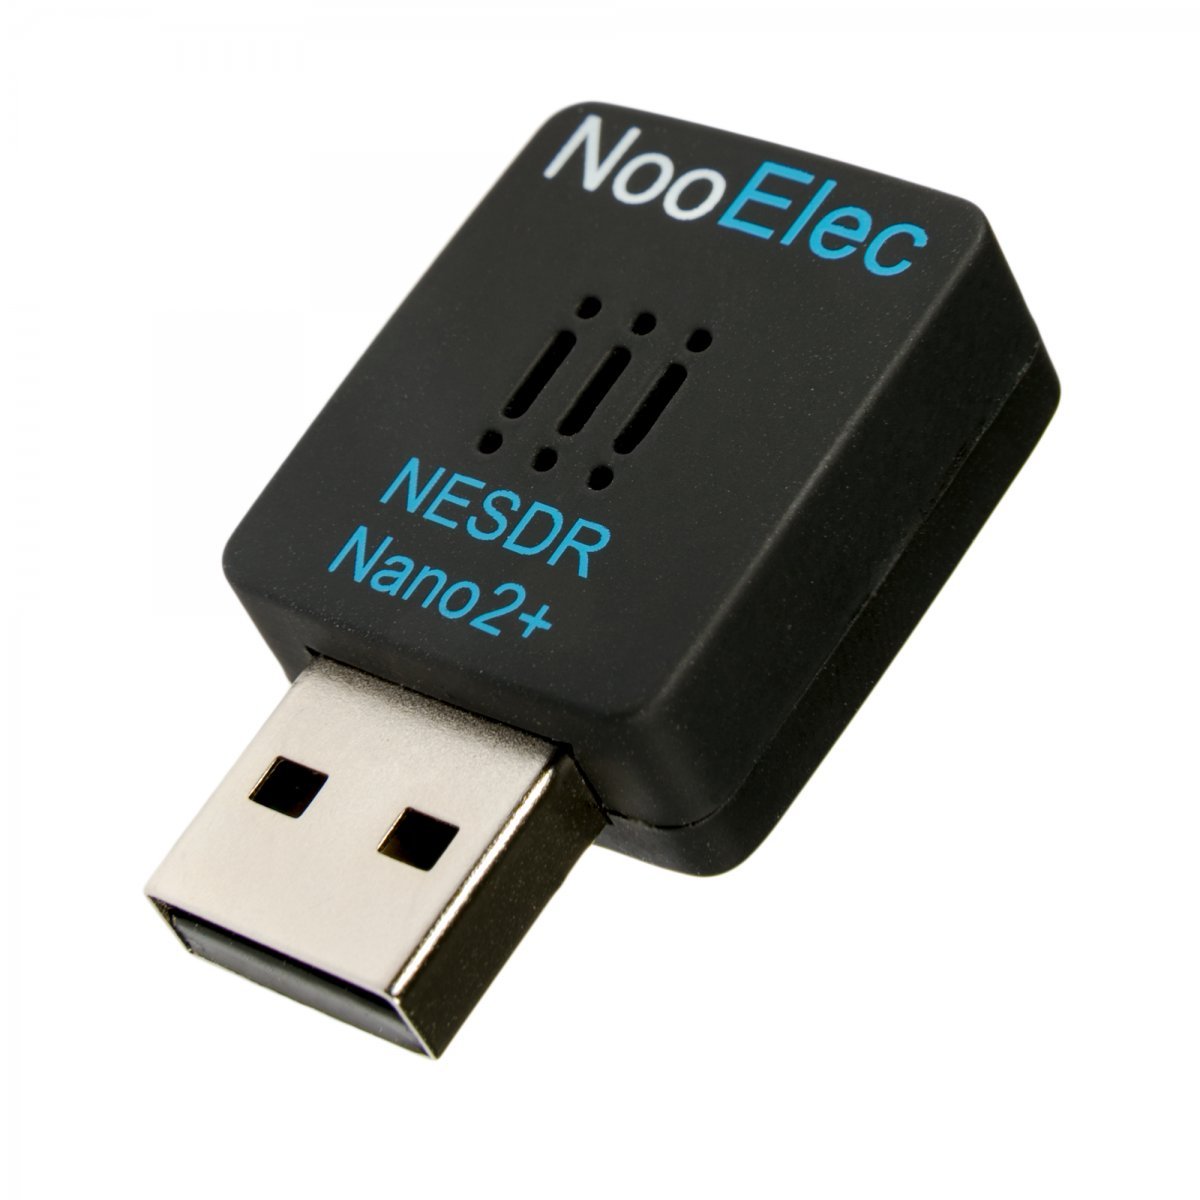 Nooelec Dual-Band NESDR Nano 2+ ADS-B (978MHz UAT & 1090MHz 1090ES) Bundle for Stratux™, Avare, Foreflight, FlightAware & Other ADS-B Applications. Includes 2 SDRs, 4 Antennas, 5 Adapters.